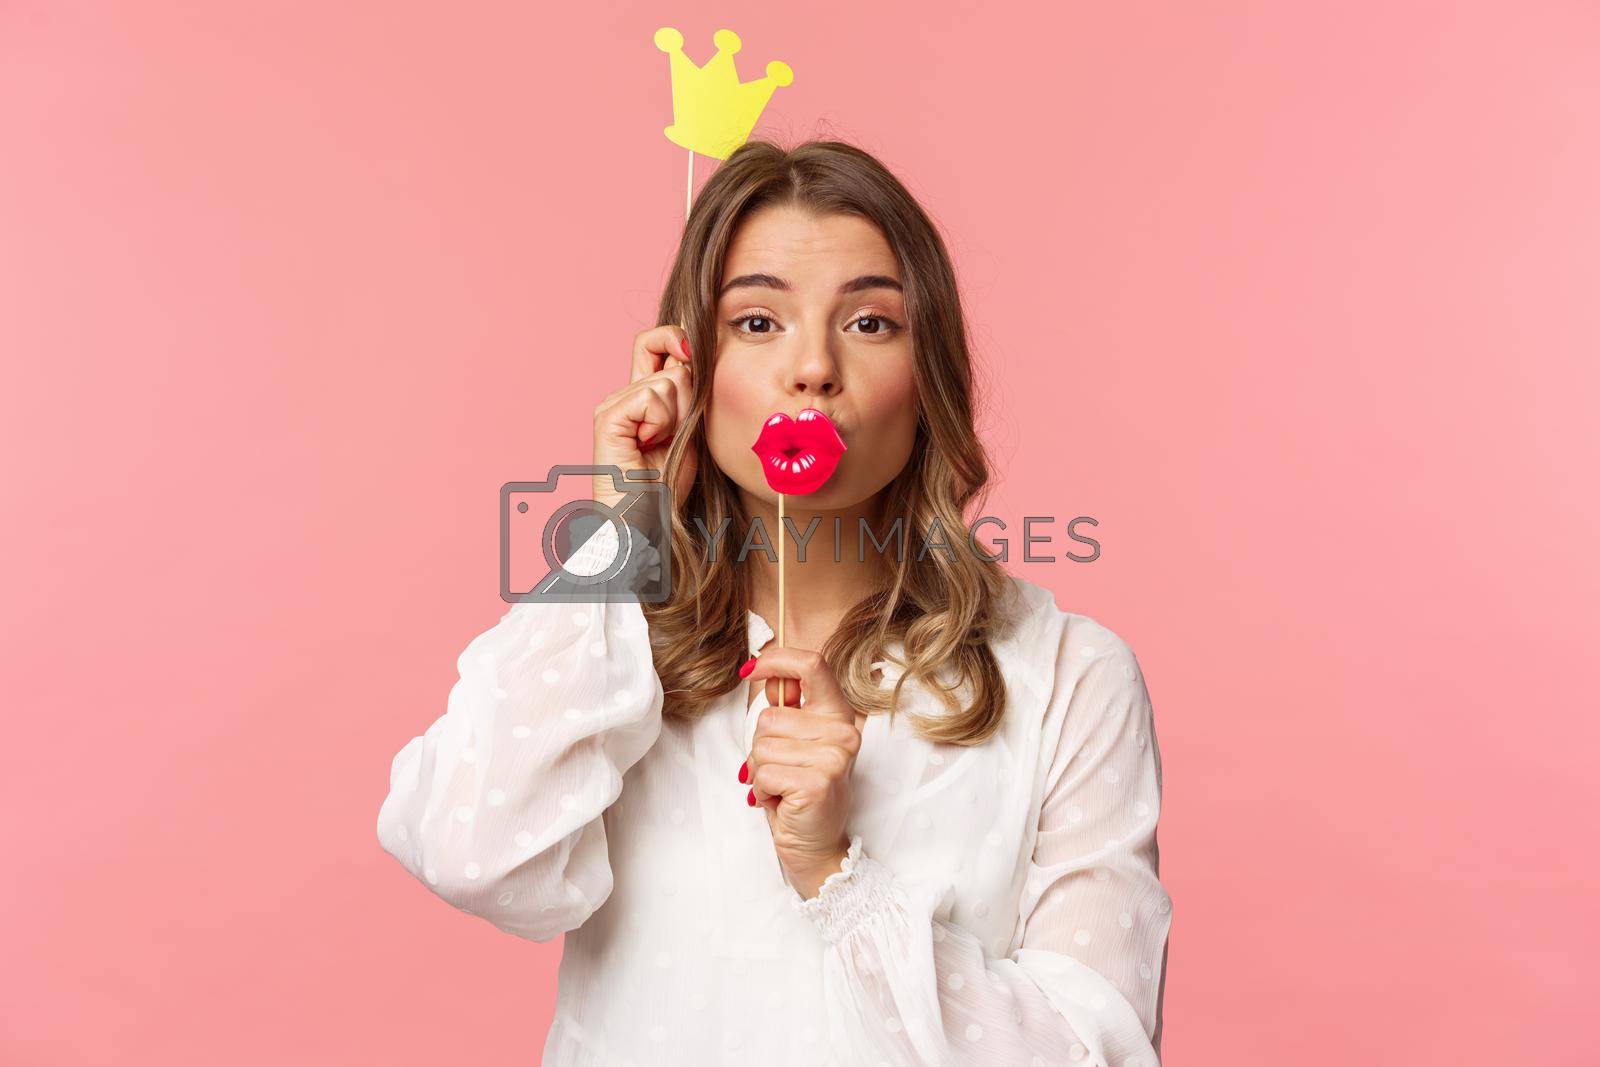 Spring, happiness and celebration concept. Close-up portrait of funny and cute, silly blond girl in white dress, holding big lips mask and crown, partying and having fun, pink background.